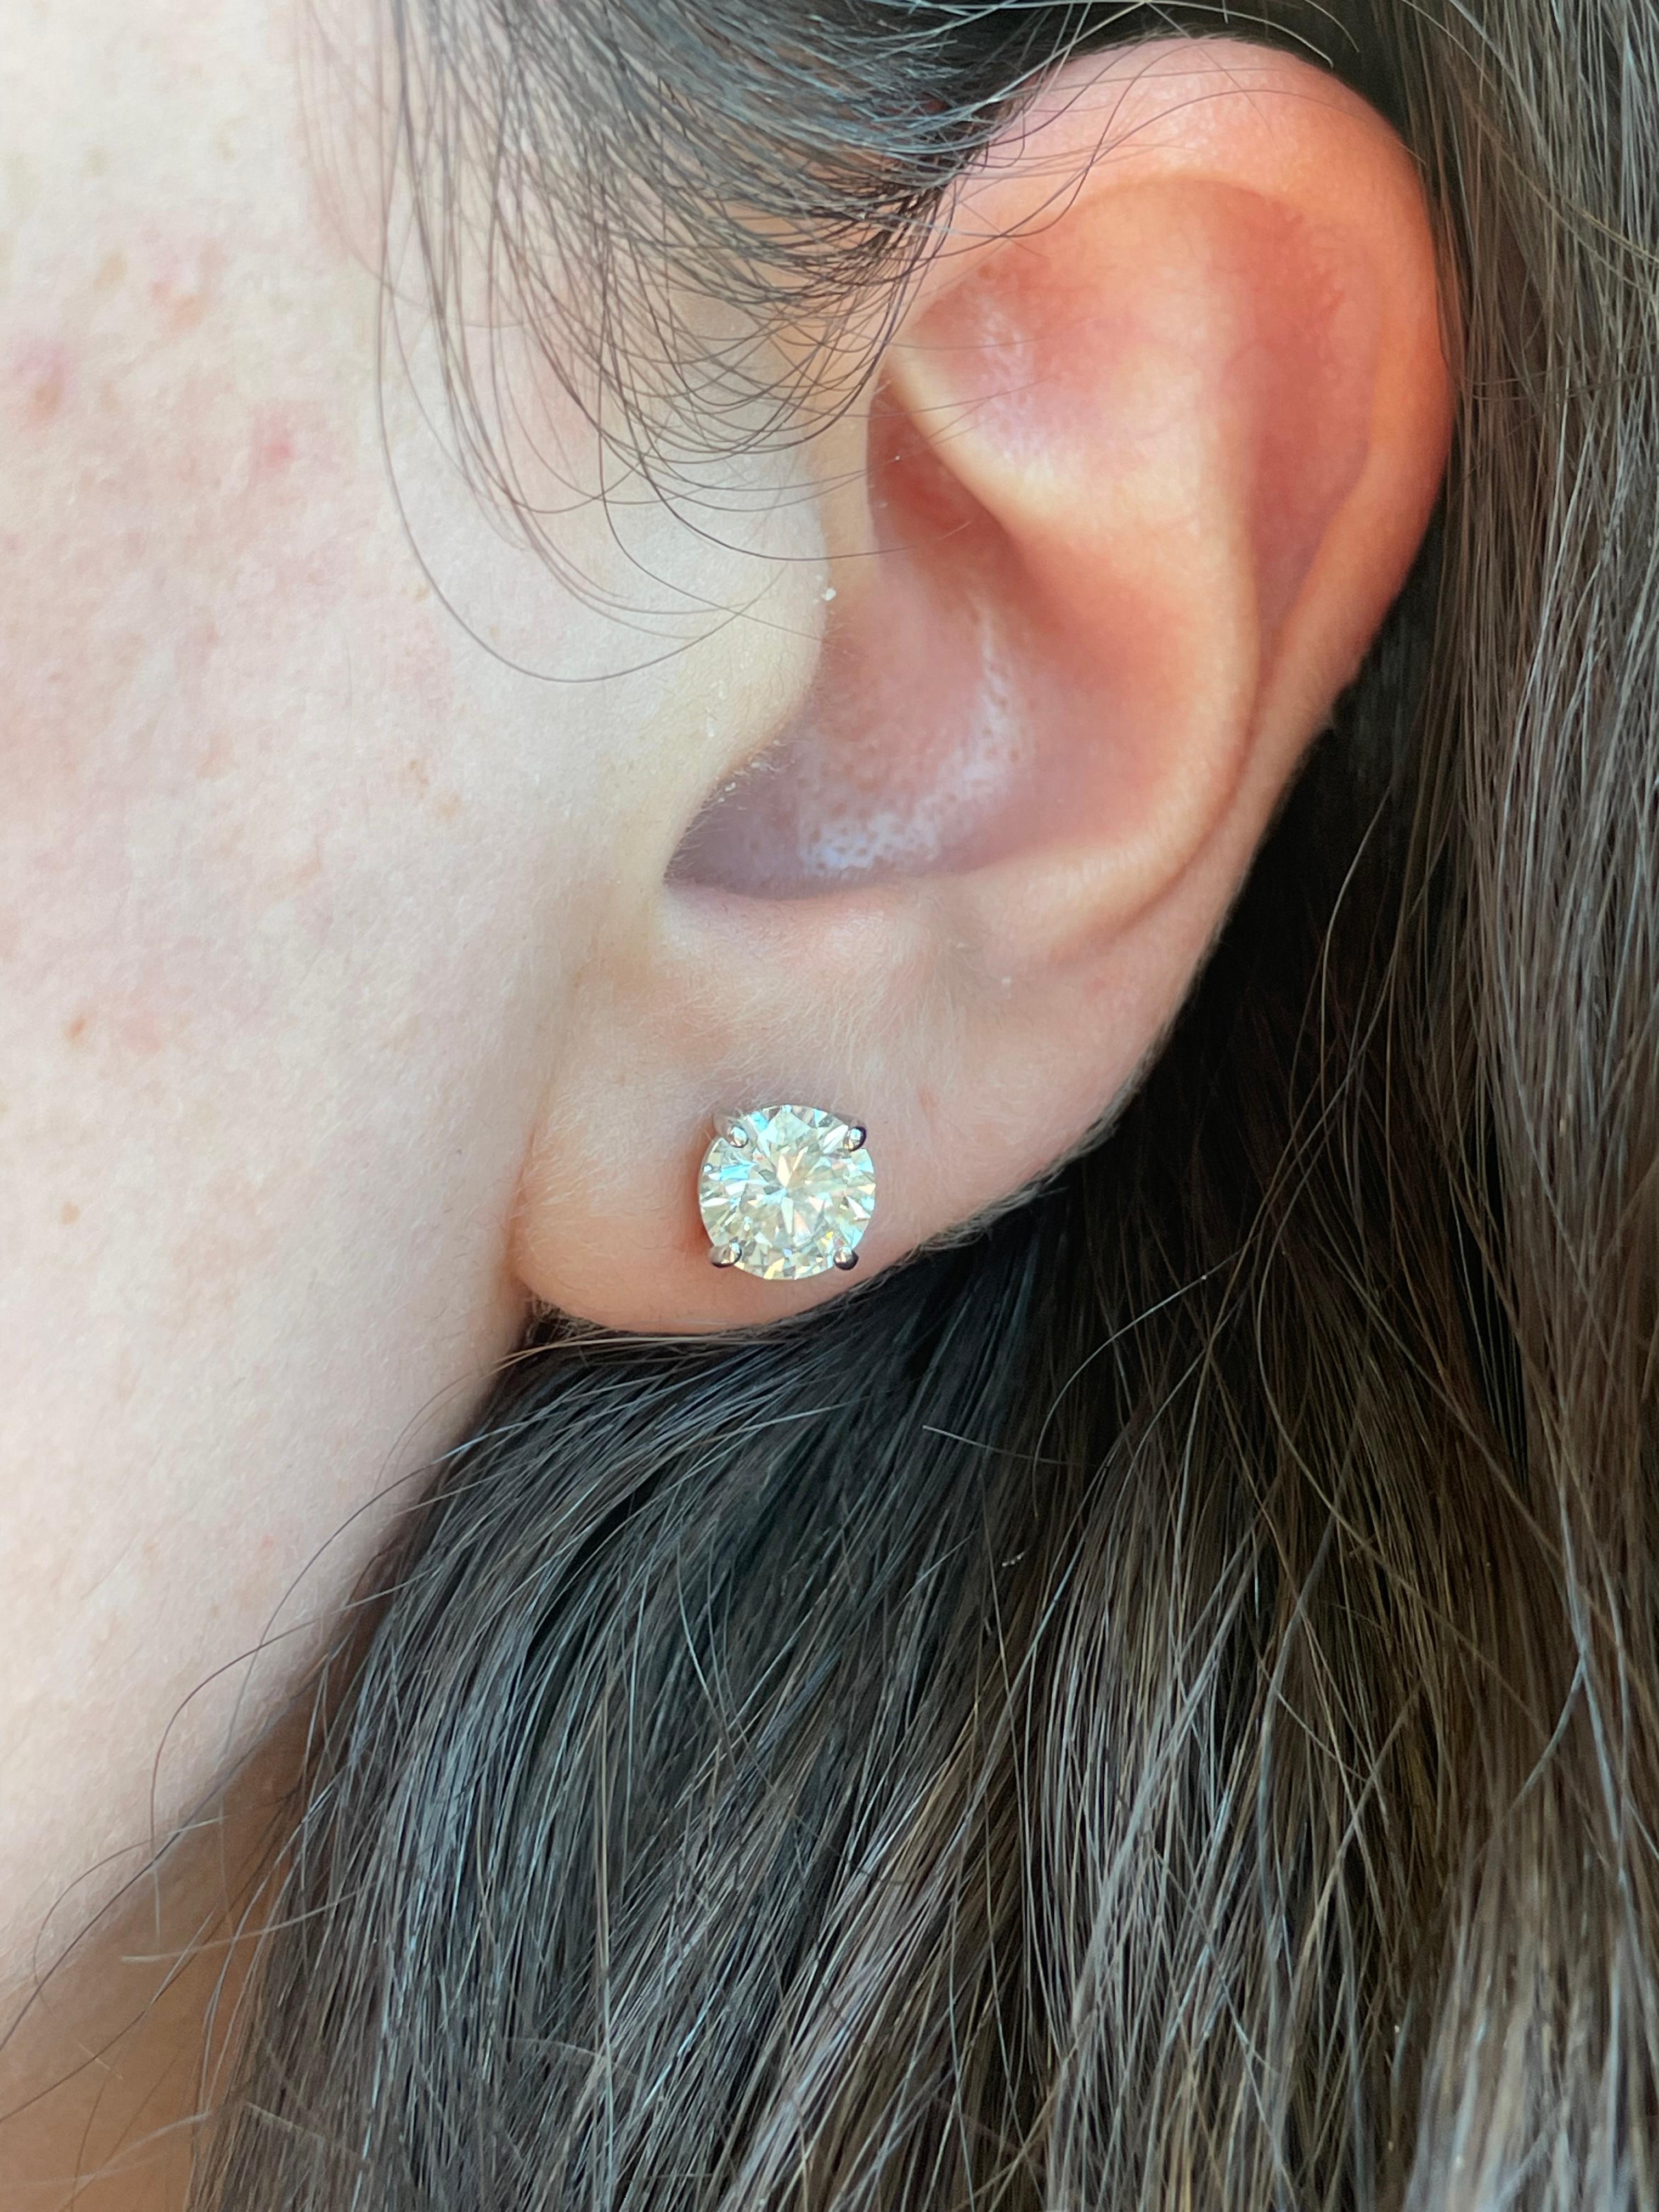 Classic diamond stud earrings, each stone EGL certified, by Alexander Beverly Hills.
Two matching round brilliant diamonds 2.21 carats total. Both stones G color grade, one stone SI1 clarity grade and the other SI2 clarity grade. 14k white